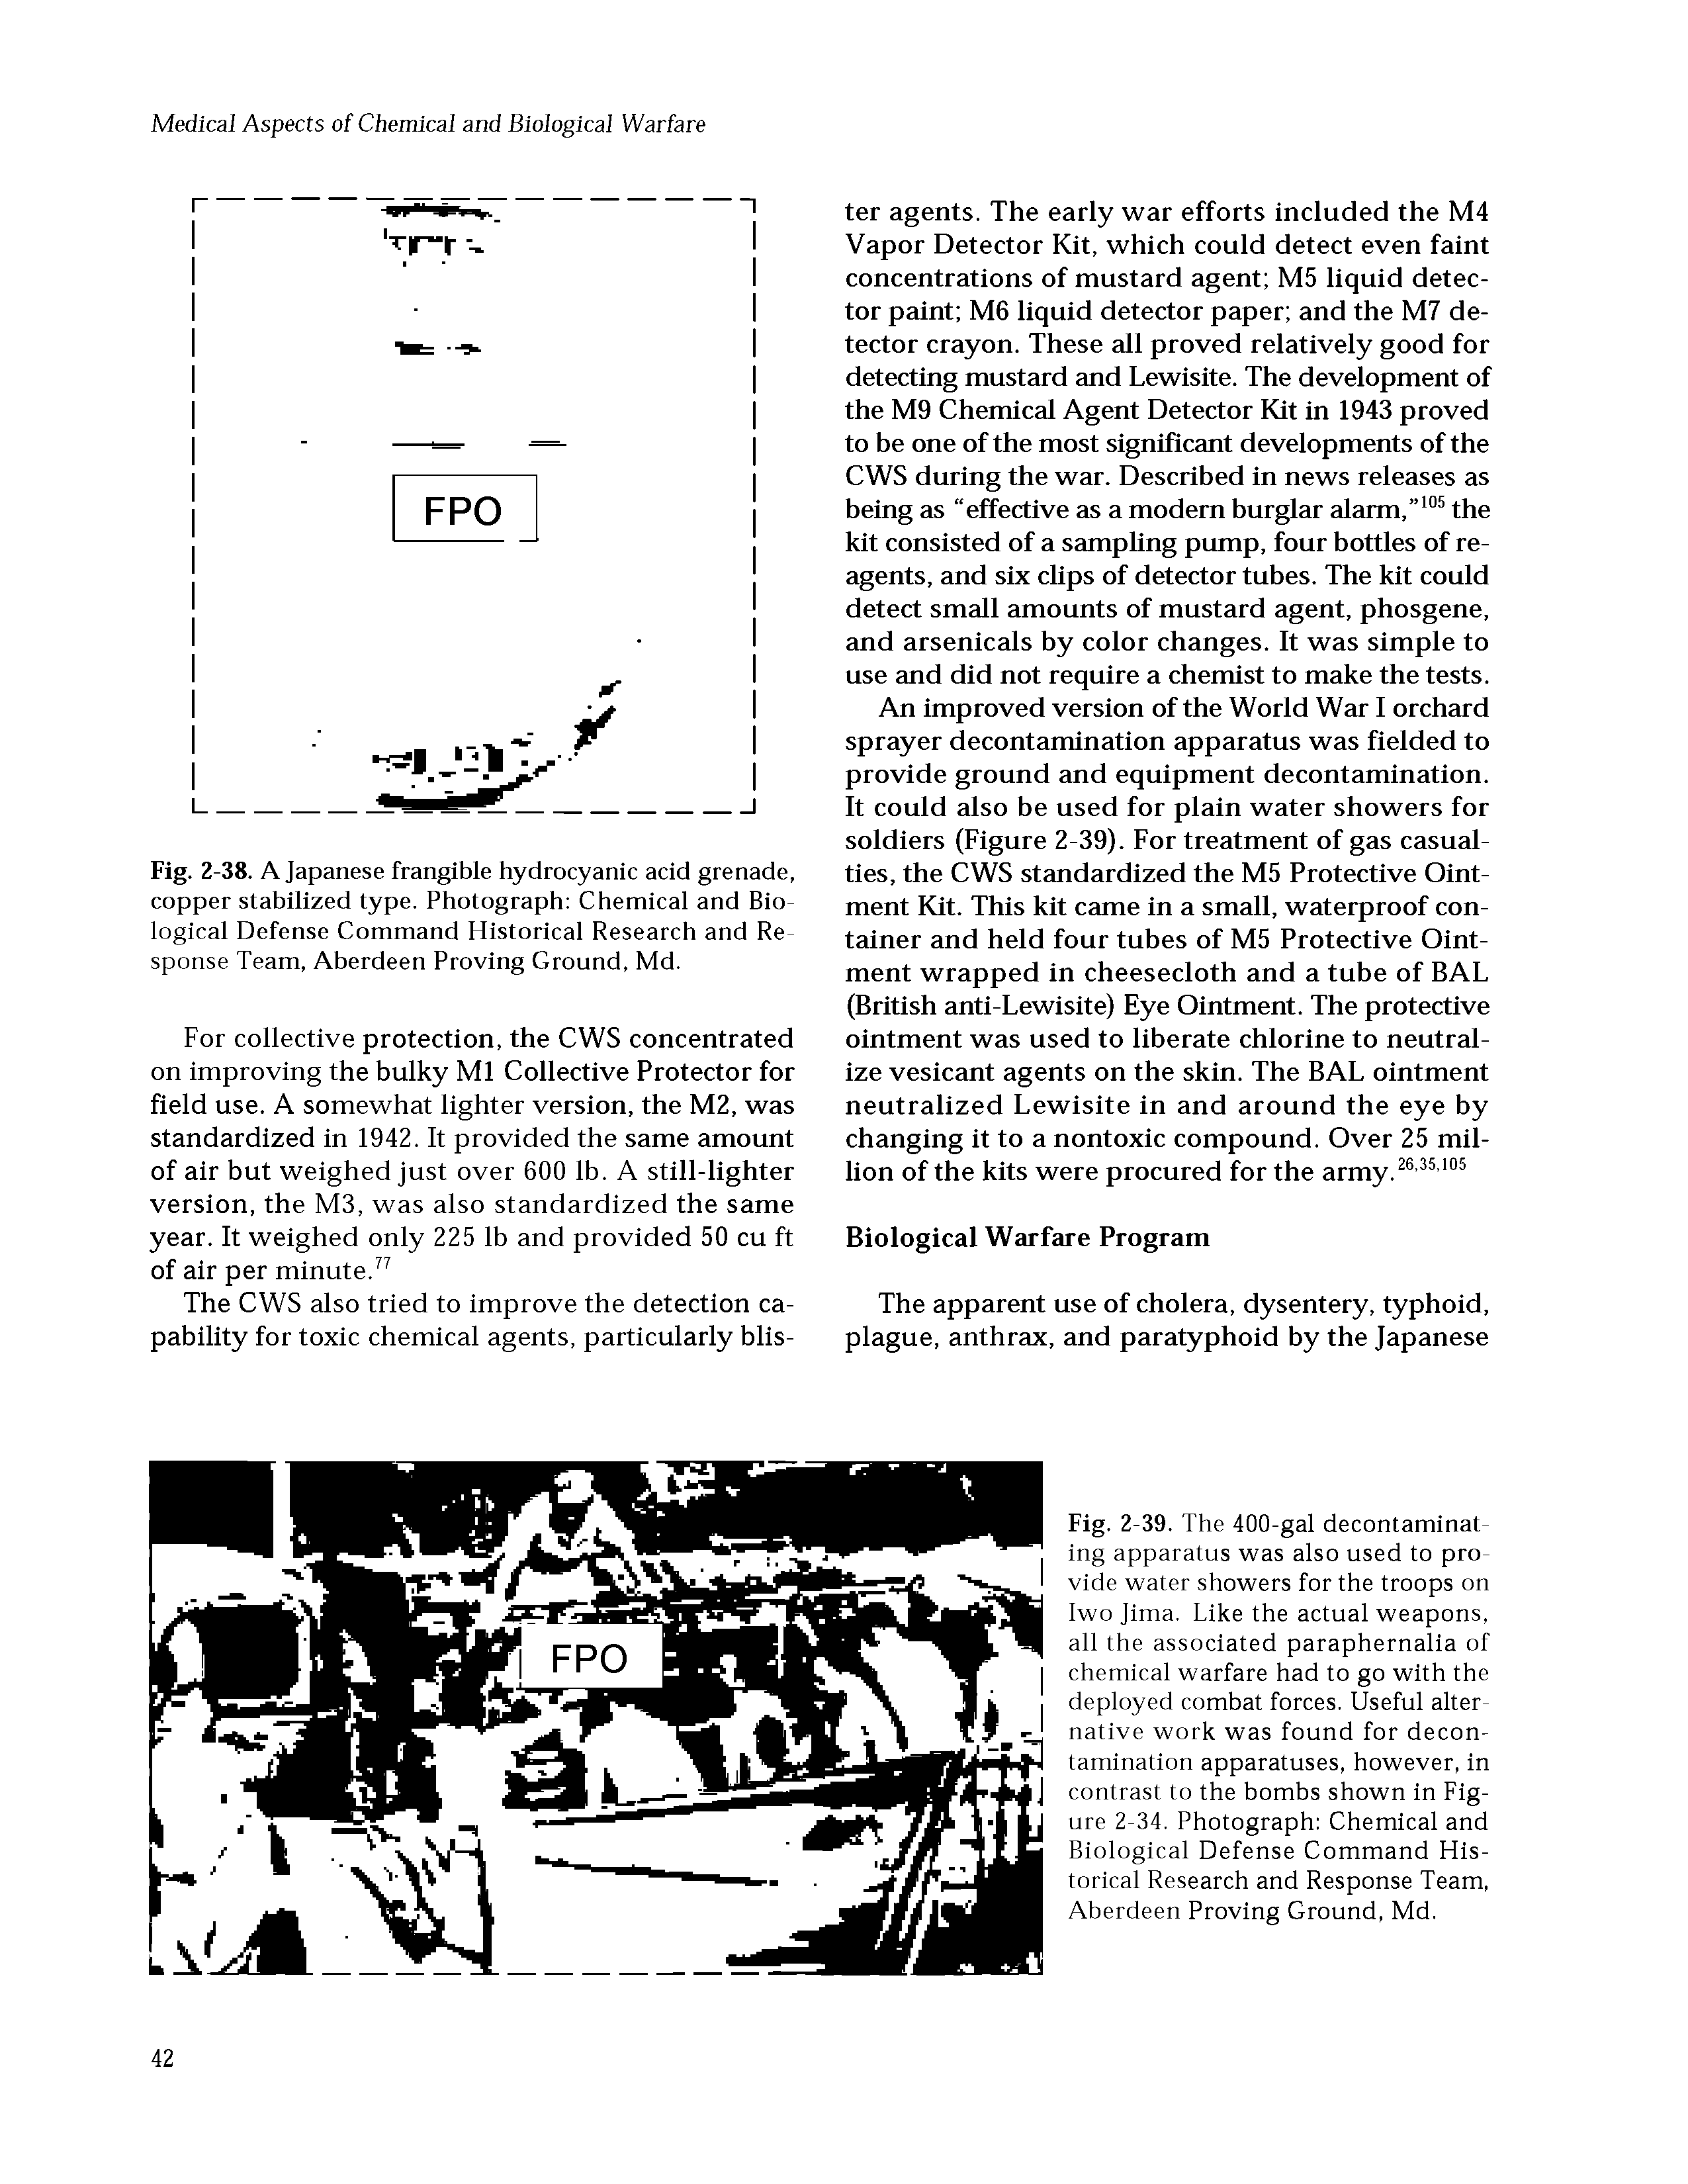 Fig. 2-39. The 400-gal decontaminating apparatus was also used to provide water showers for the troops on Iwo Jima. Like the actual weapons, all the associated paraphernalia of chemical warfare had to go with the deployed combat forces. Useful alternative work was found for decontamination apparatuses, however, in contrast to the bombs shown in Figure 2-34. Photograph Chemical and Biological Defense Command Historical Research and Response Team, Aberdeen Proving Ground, Md.